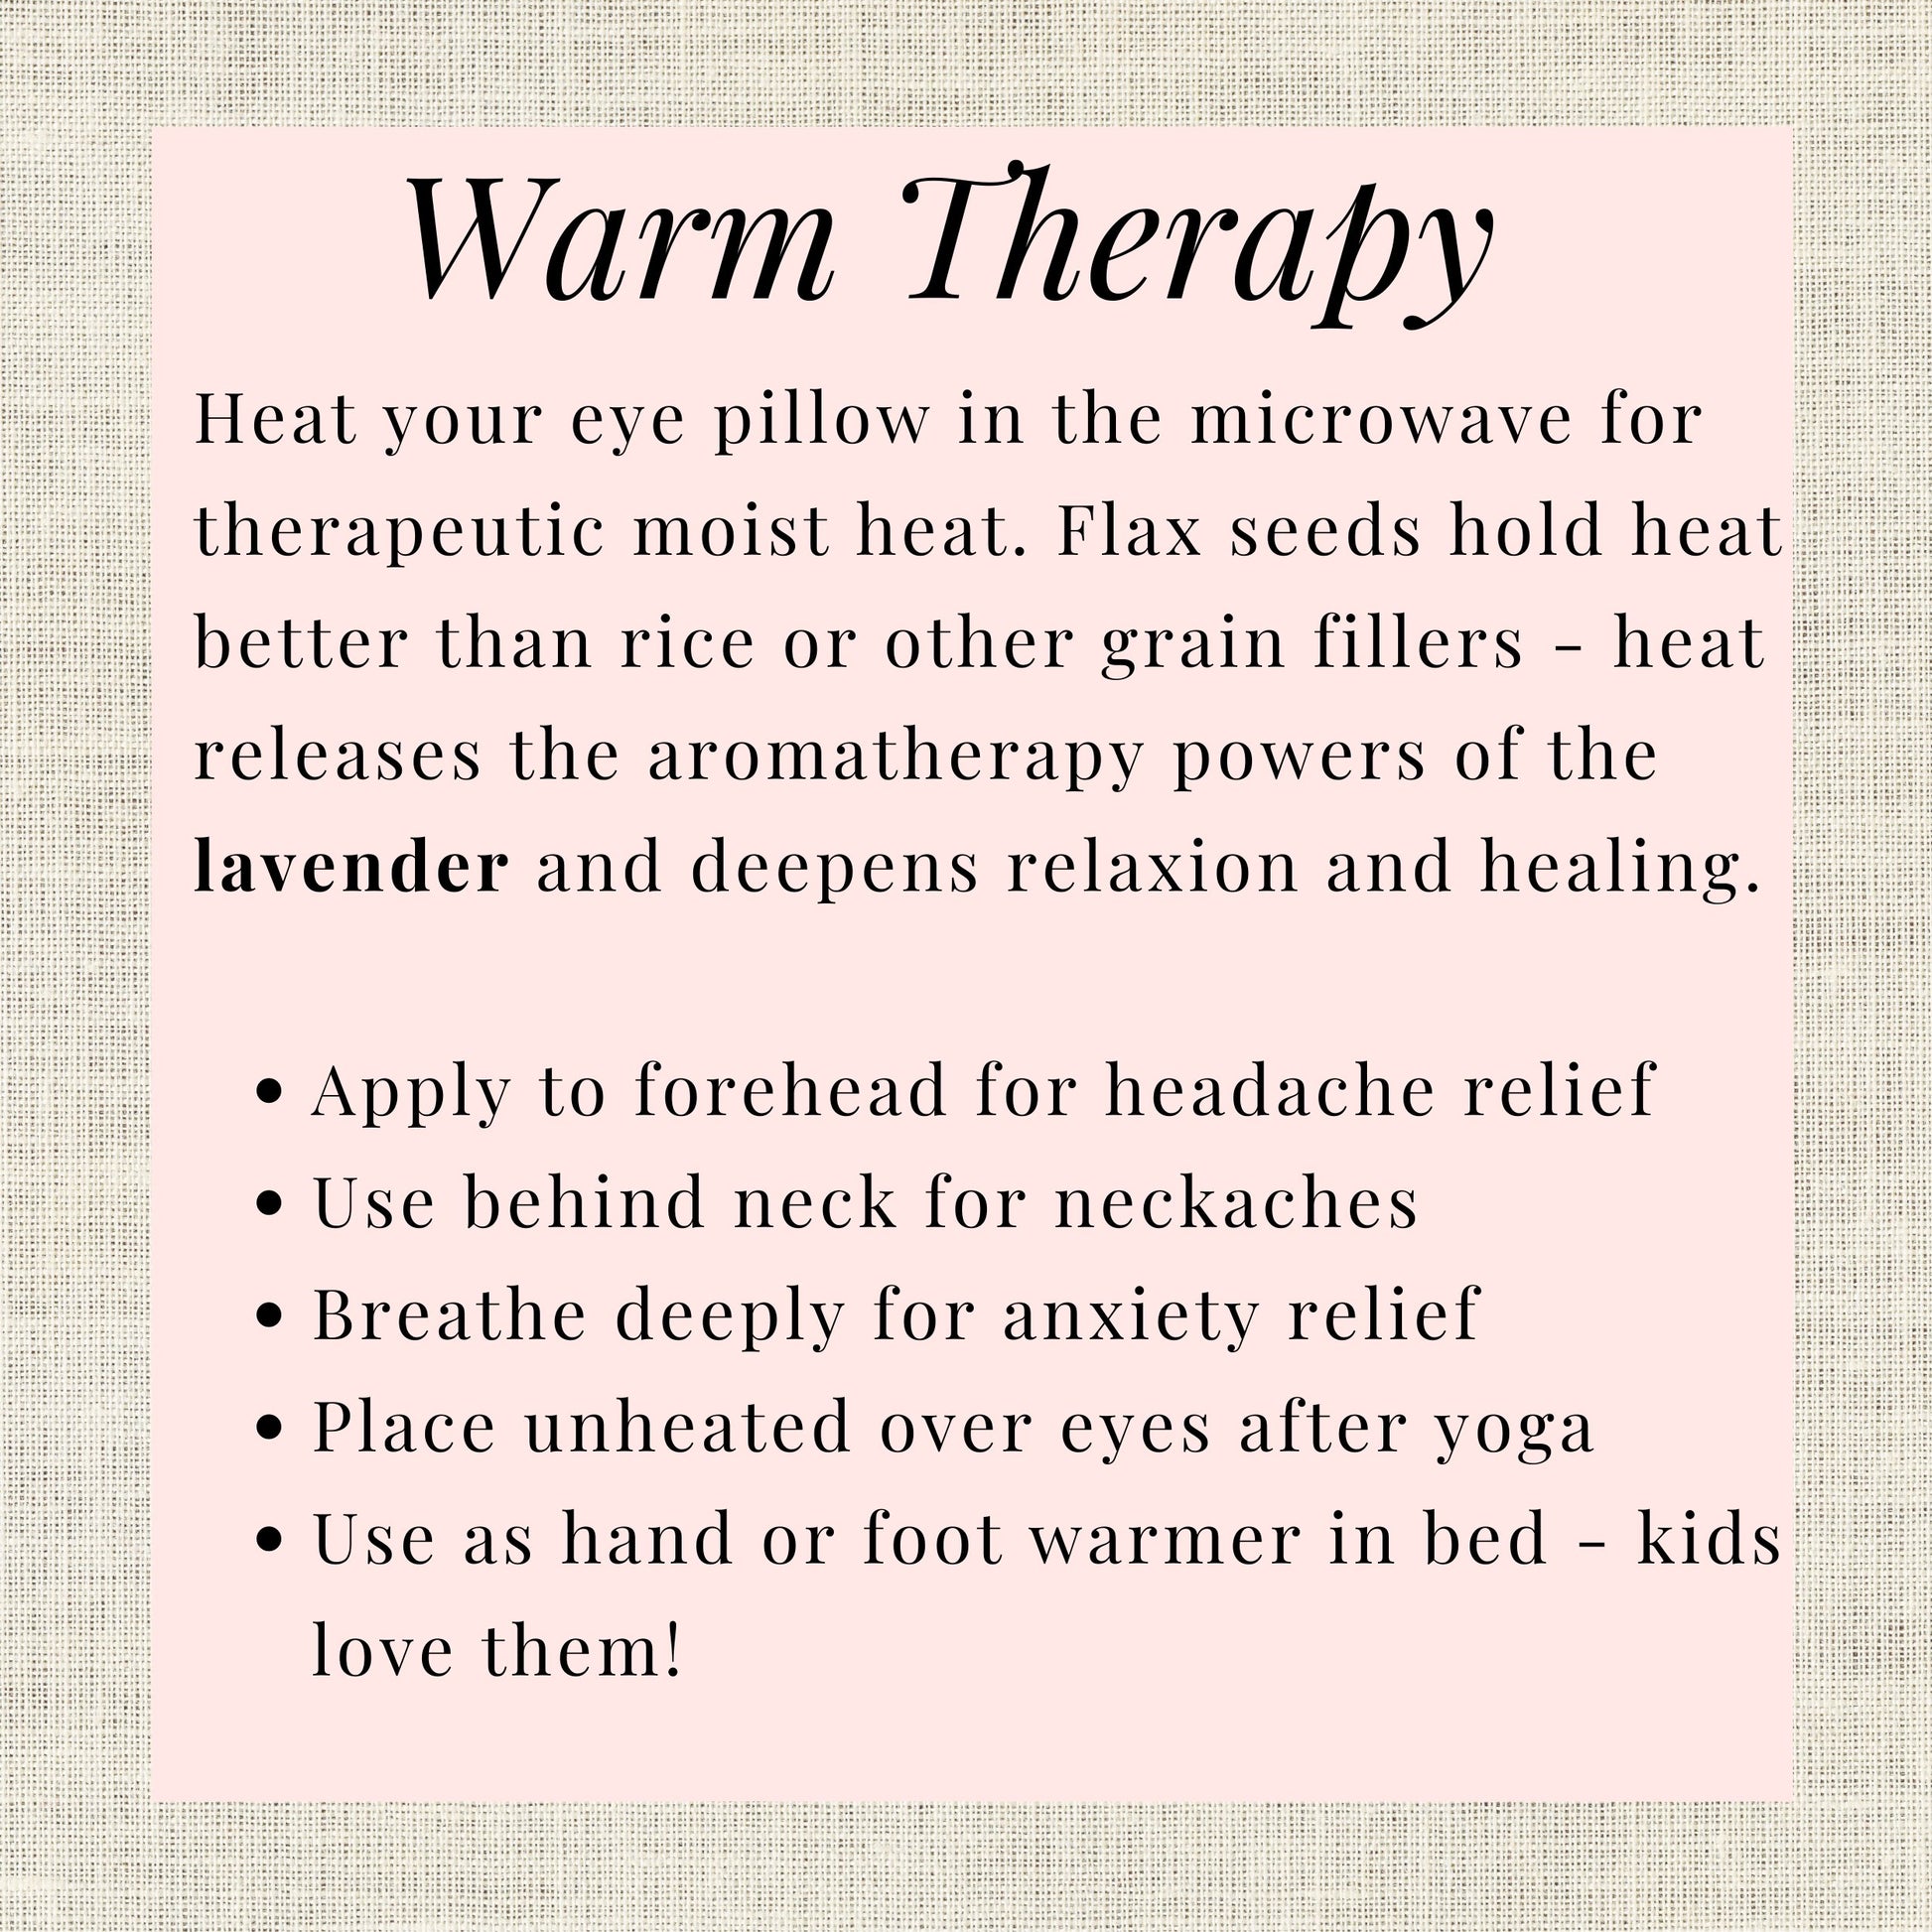 Detailed instructions for warm therapy